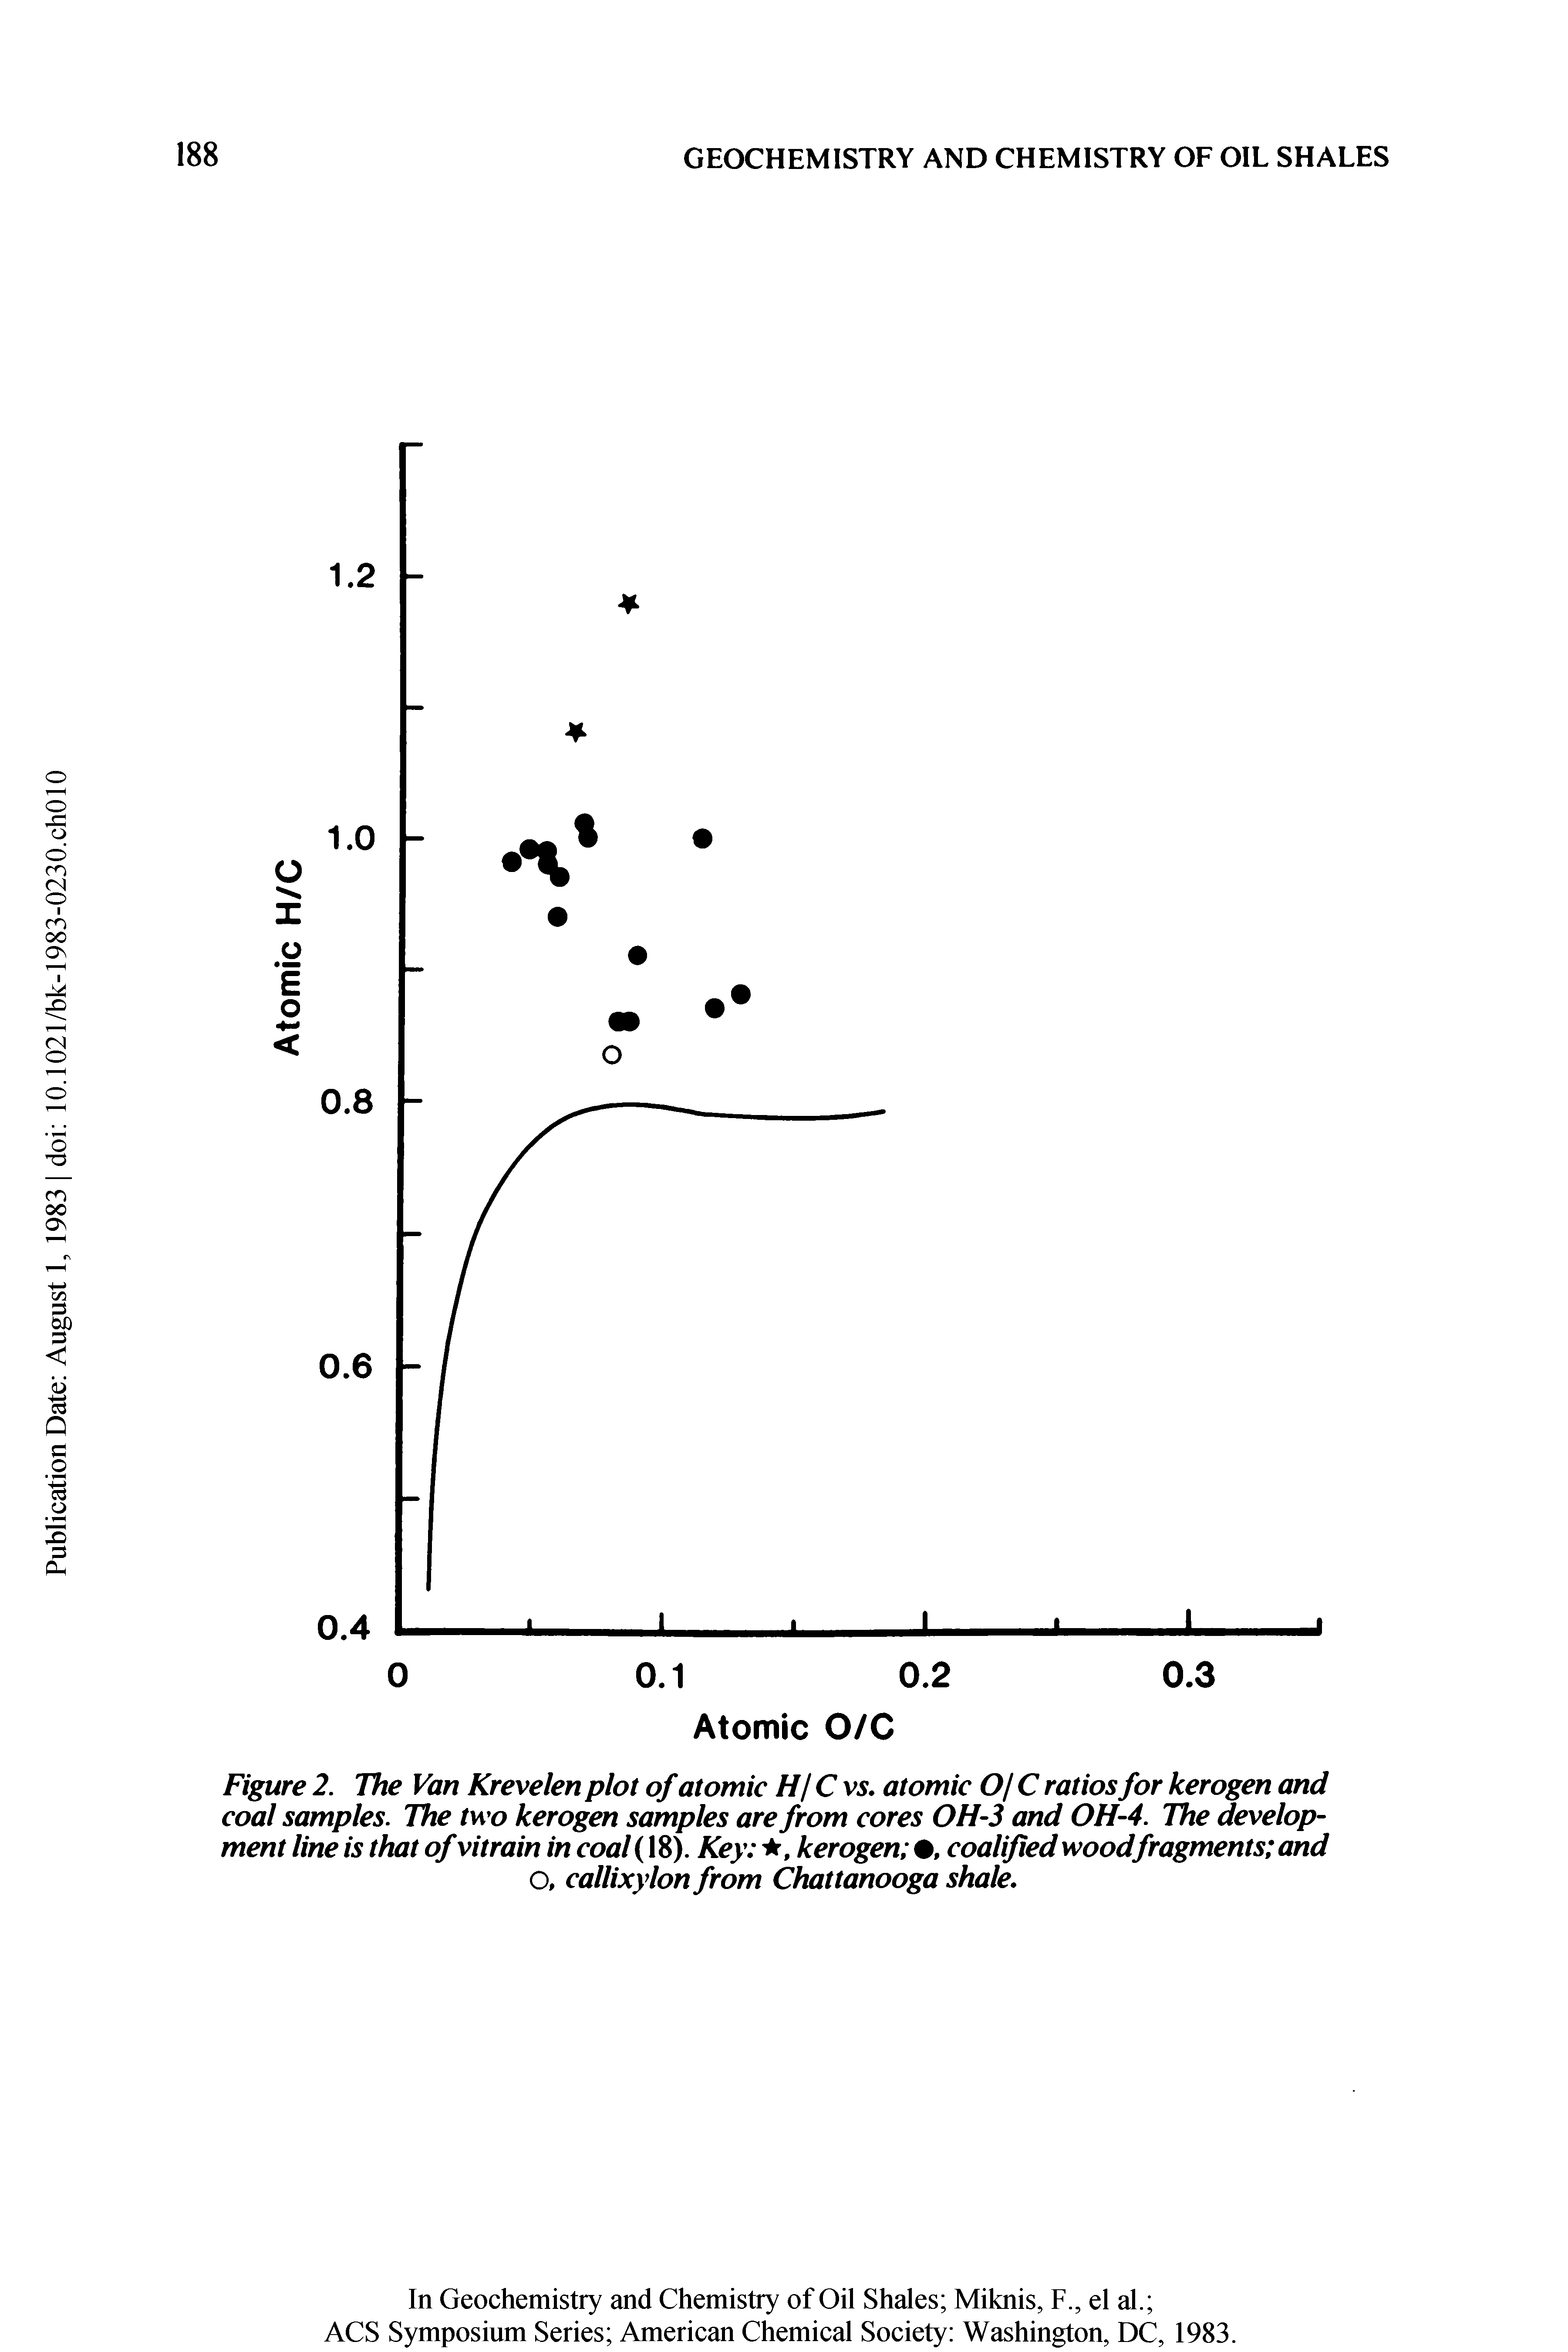 Figure 2. The Van Krevelen plot of atomic /// C vs. atomic O/ C ratios for kerogen and coal samples. The two kerogen samples are from cores OH-3 and OH-4. The development line is that of vitrain in coal (18). Key , kerogen , coalijied wood fragments and O, callixylon from Chattanooga shale.